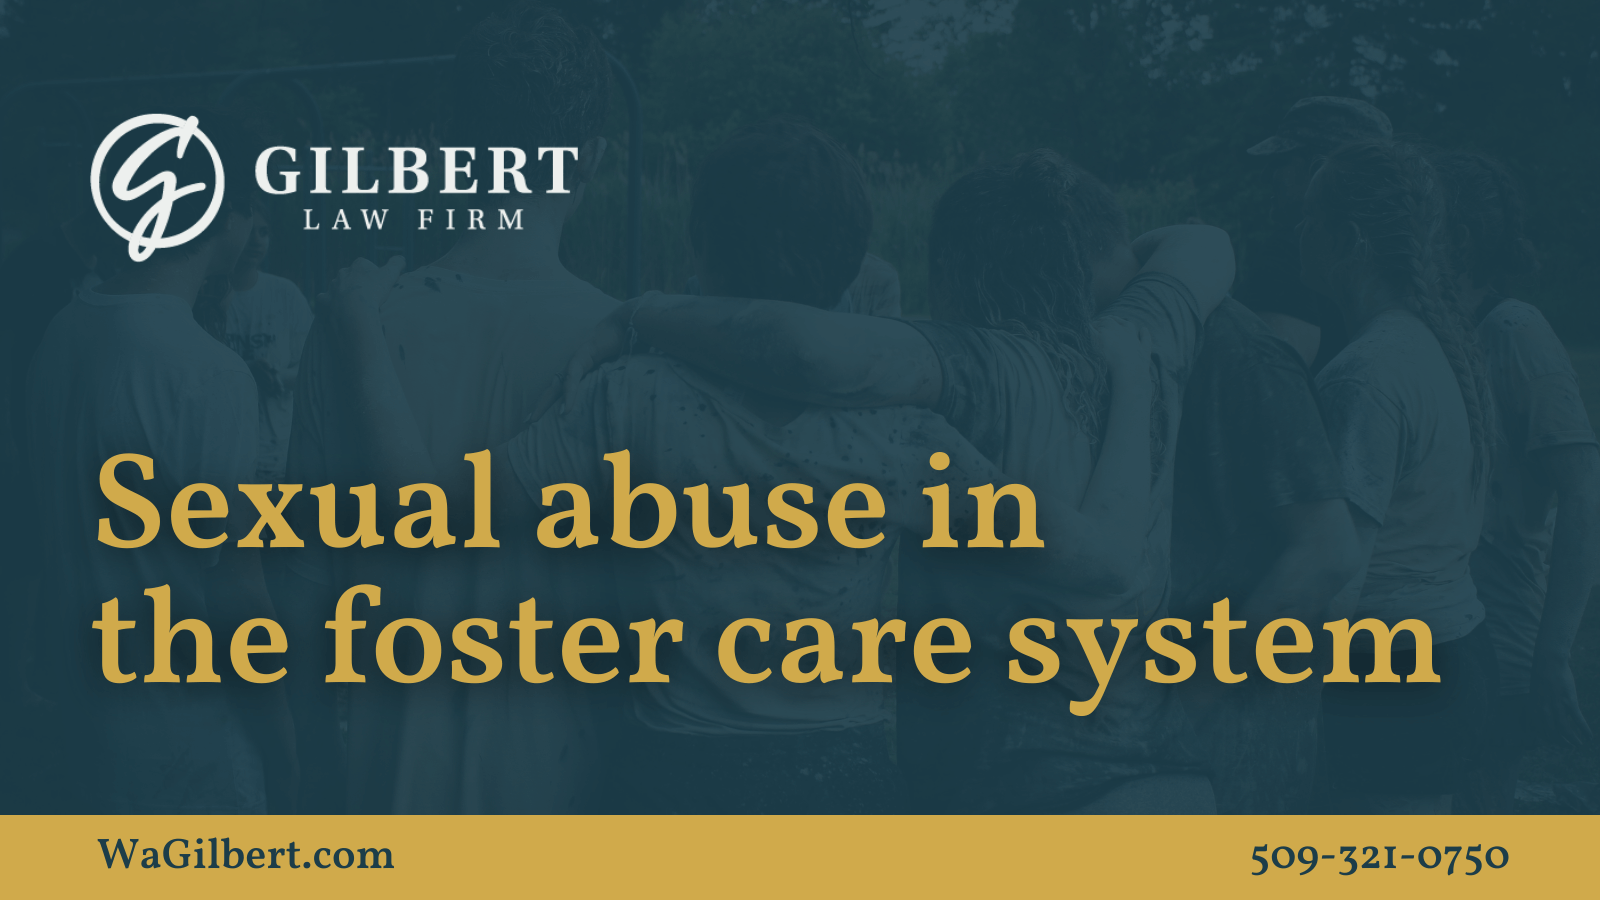 Sexual abuse in the foster care system | Gilbert Law Firm Spokane Washington